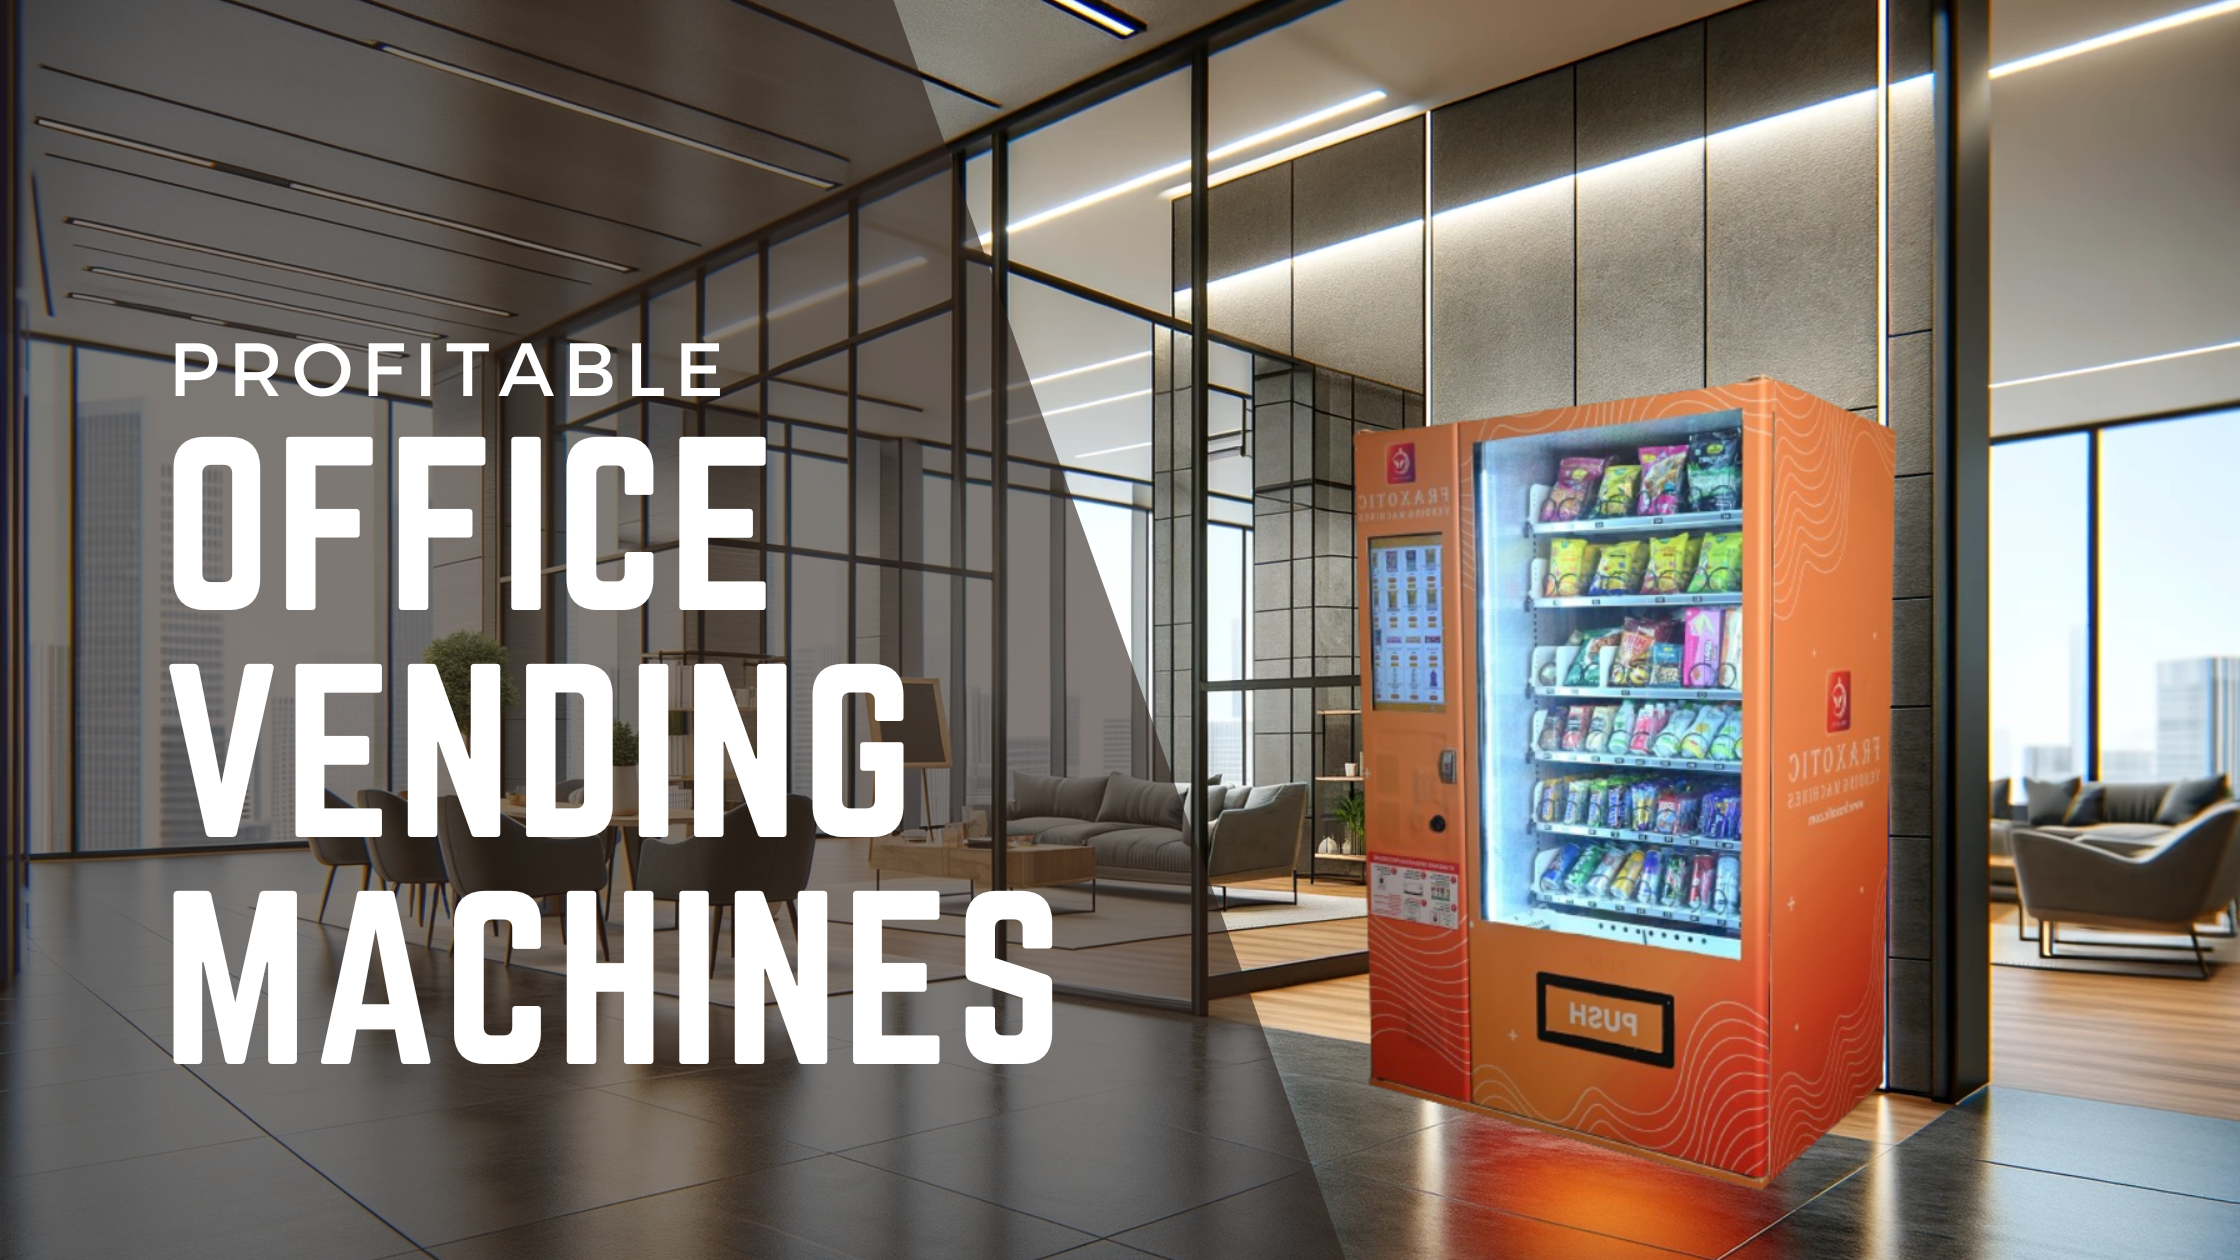 A Step-by-Step Guide to Profitable Office Vending Machines